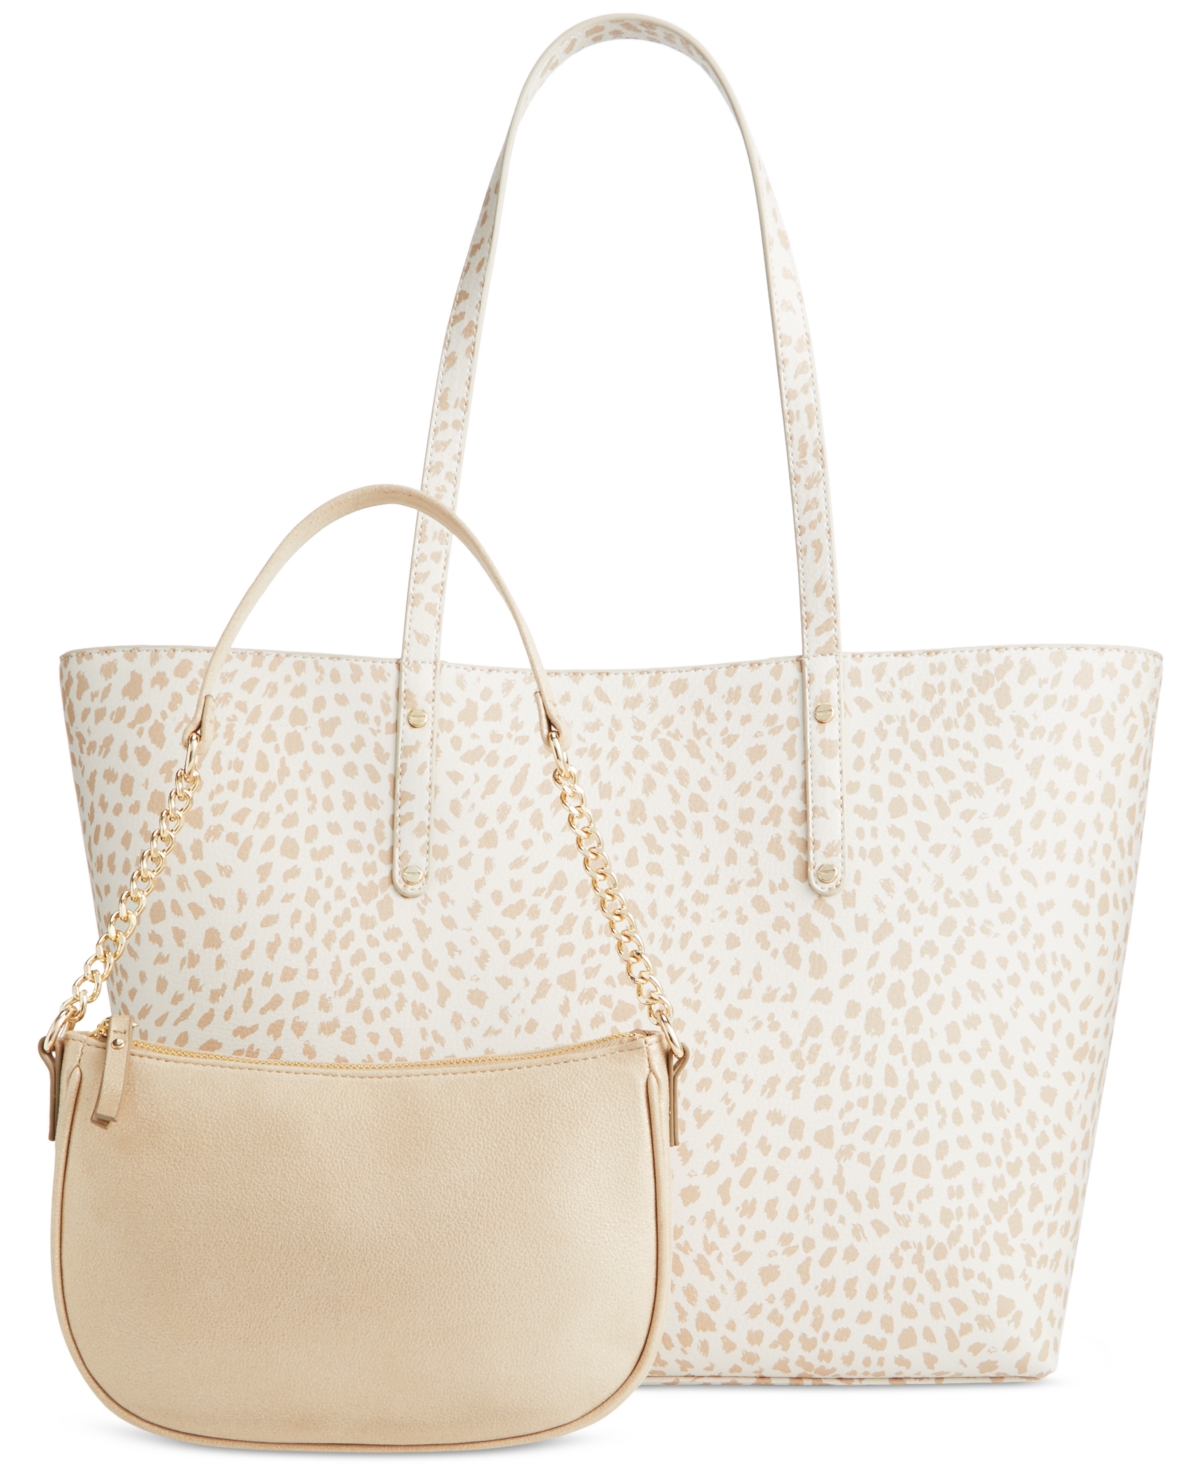 Inc International Concepts Zoiey 2-1 Tote, Created For Macy's In Bone Leo,chpgn